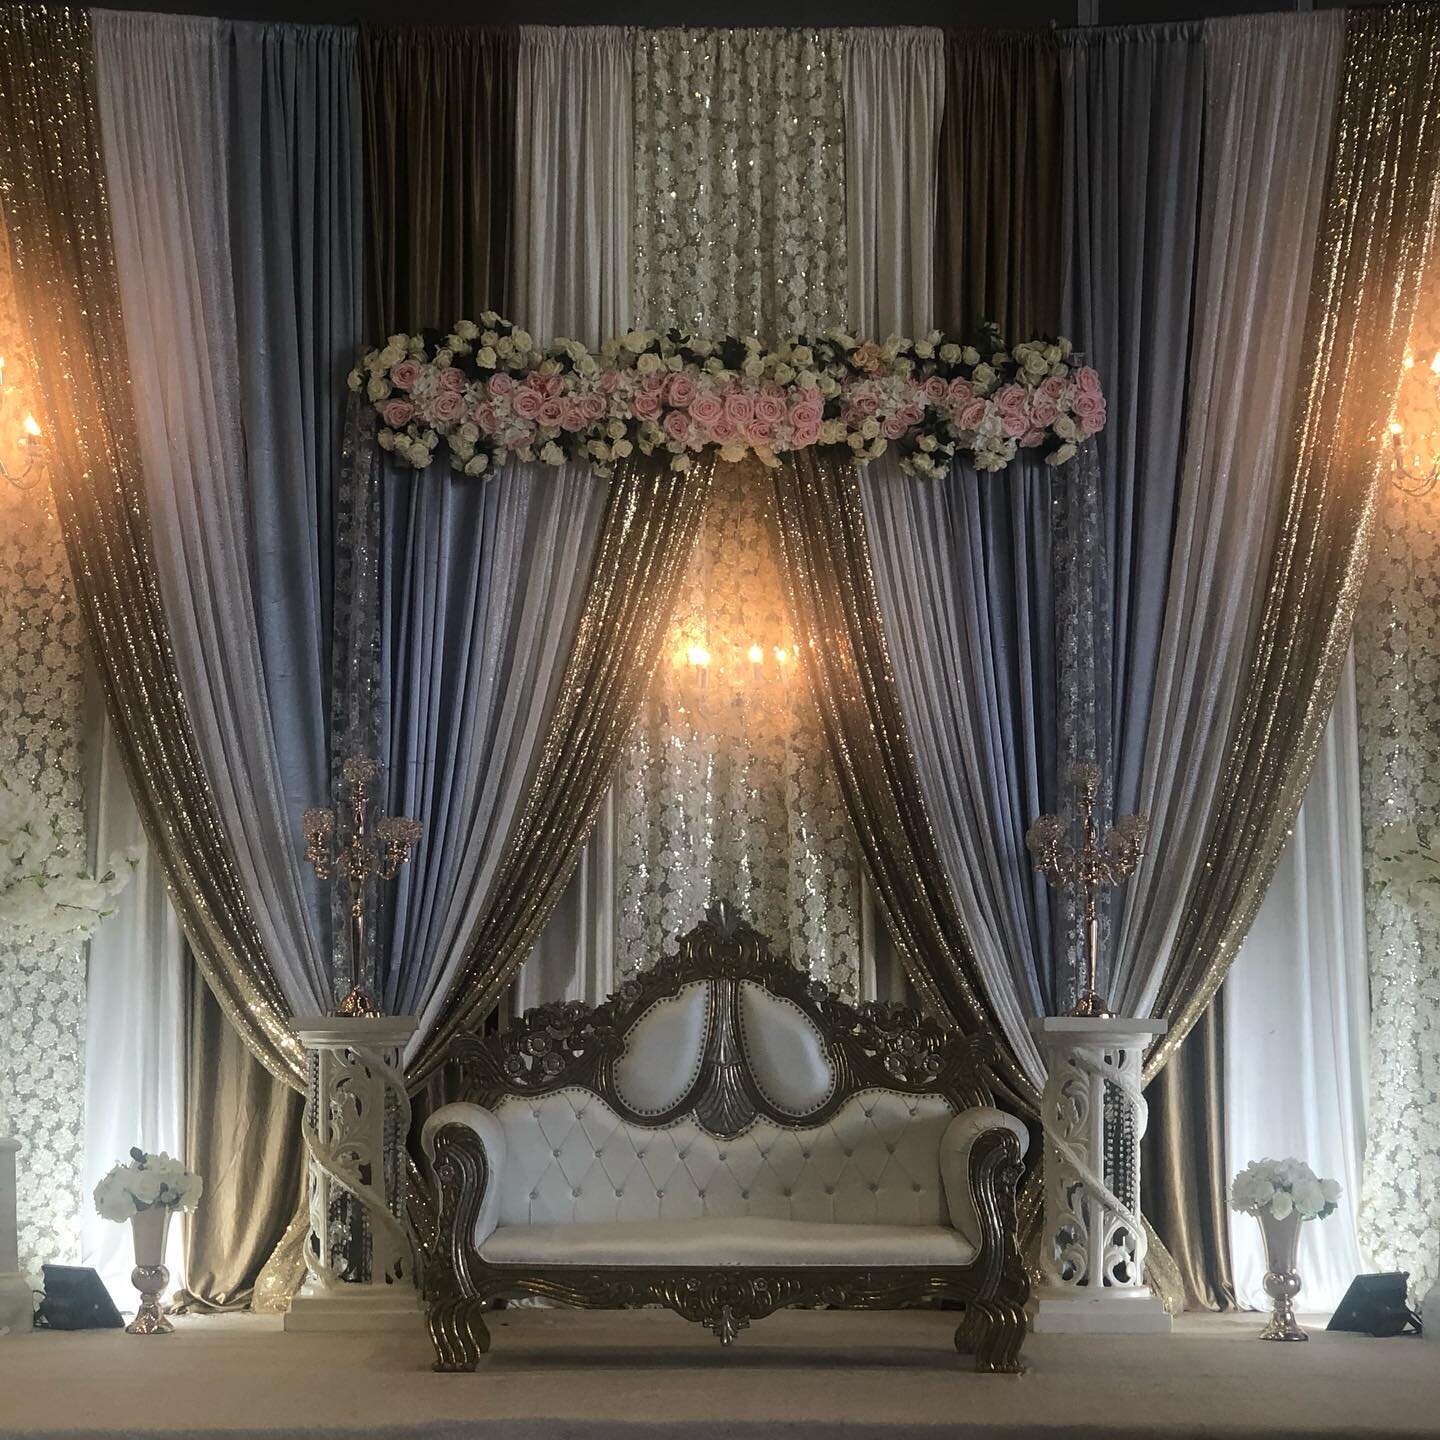 Fit for a King &amp; Queen! Available dates for 2021. Call our Sales Team to book your Special Day at 416-814-3600.